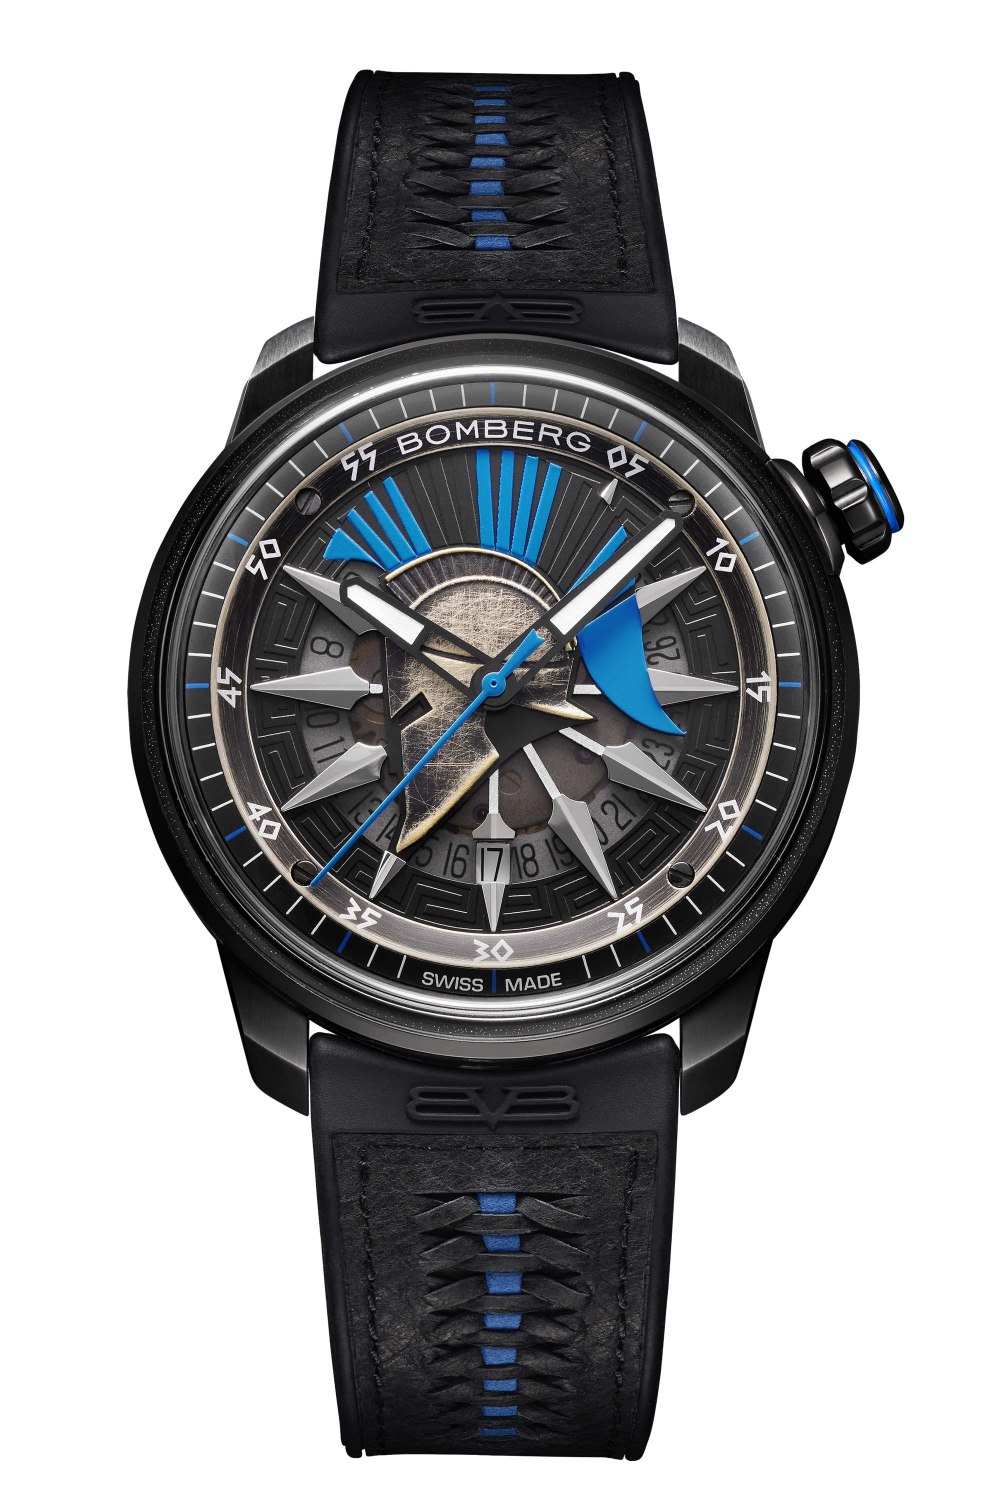 Limited Edition BOMBERG BB-01 Automatic SPARTAN Blue